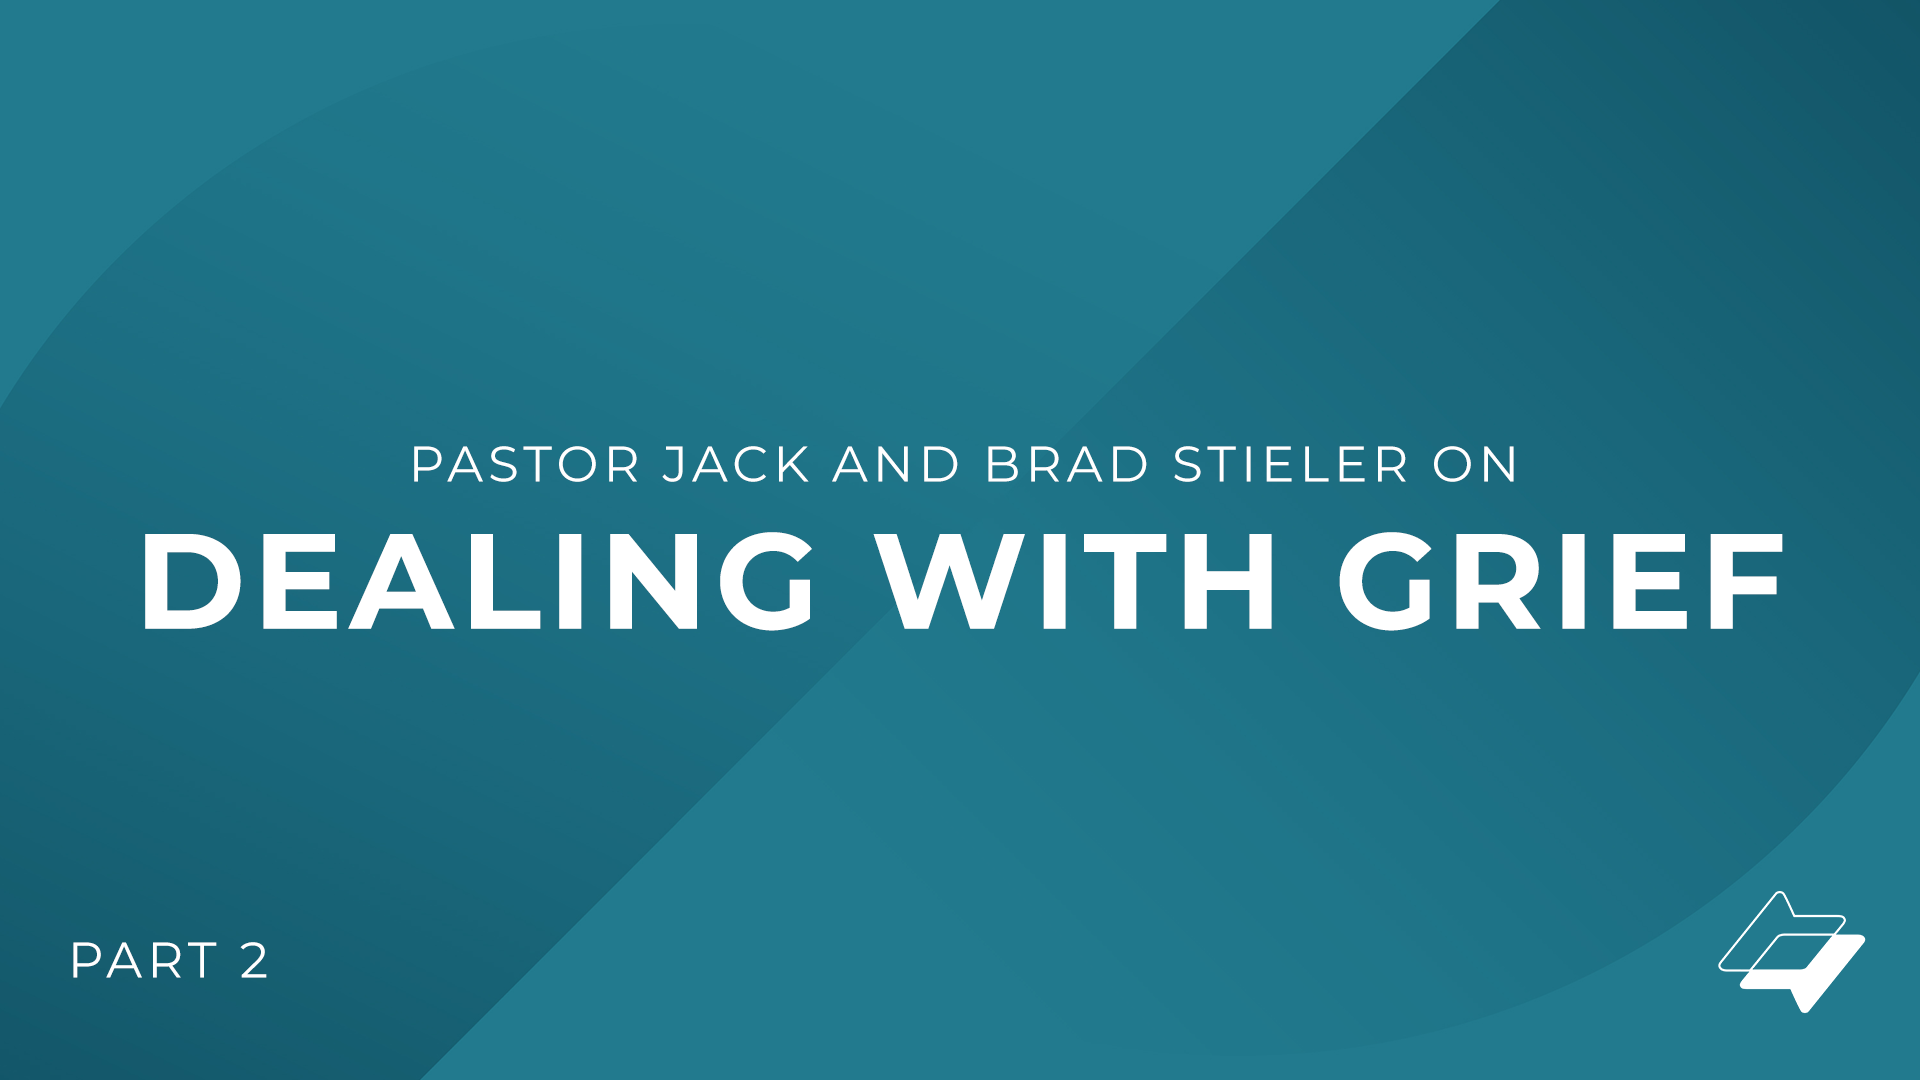 Pastor Jack and Brad Stieler on Dealing with Grief – Part 2